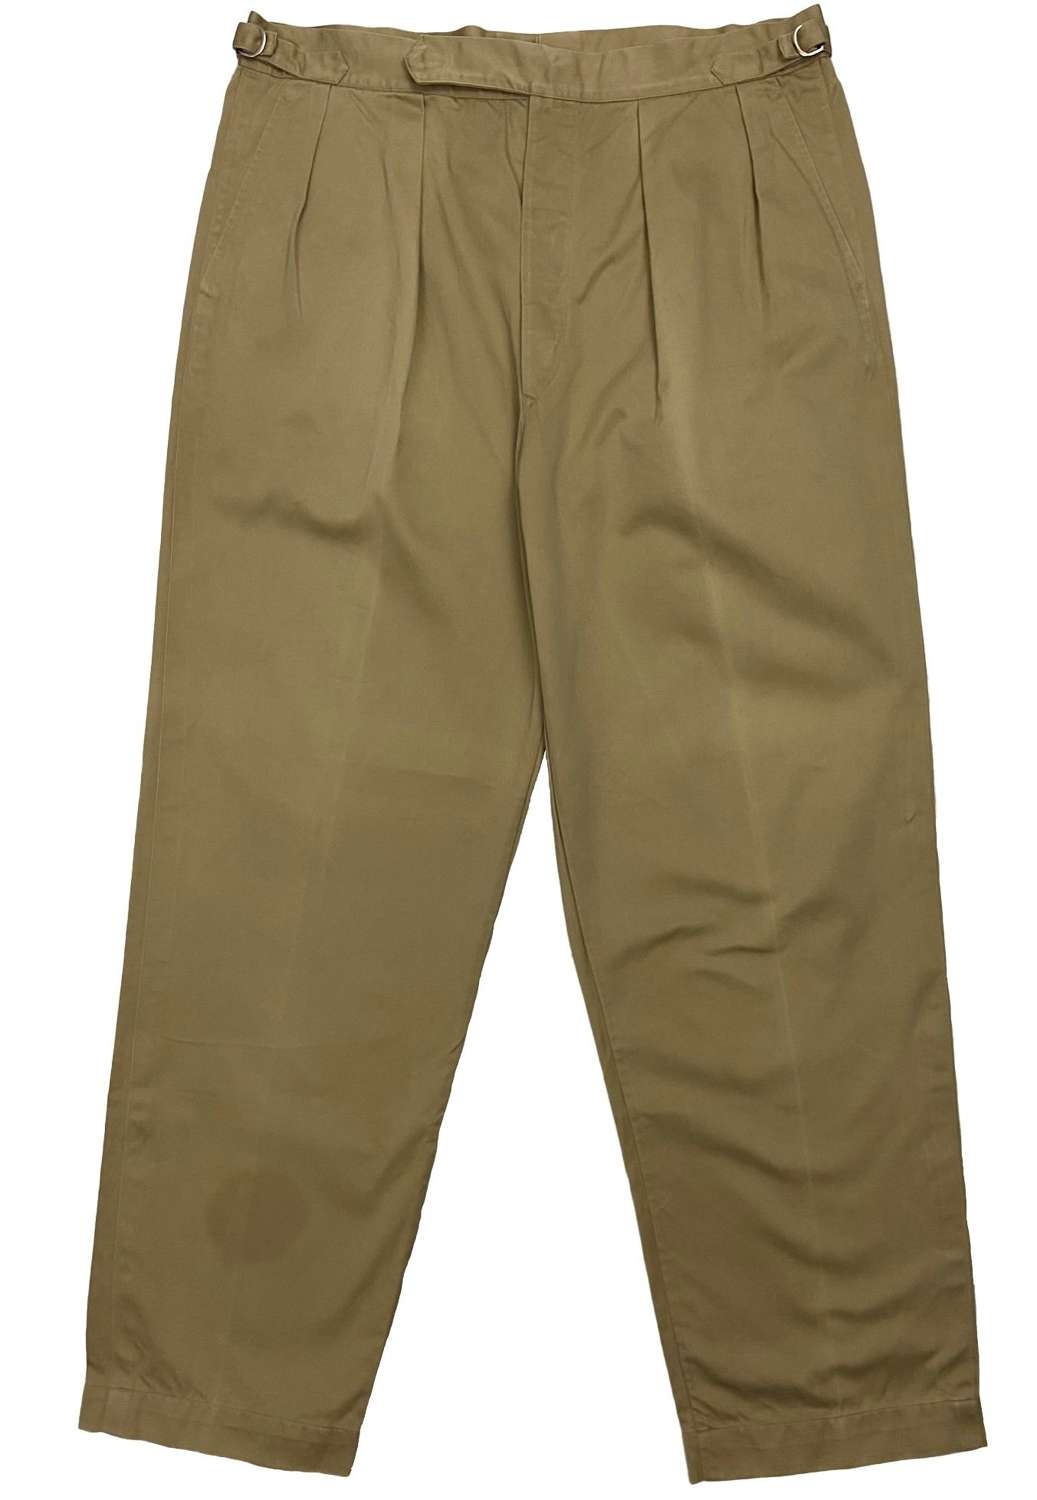 Original 1950s British Army Officers Khaki Drill Trousers